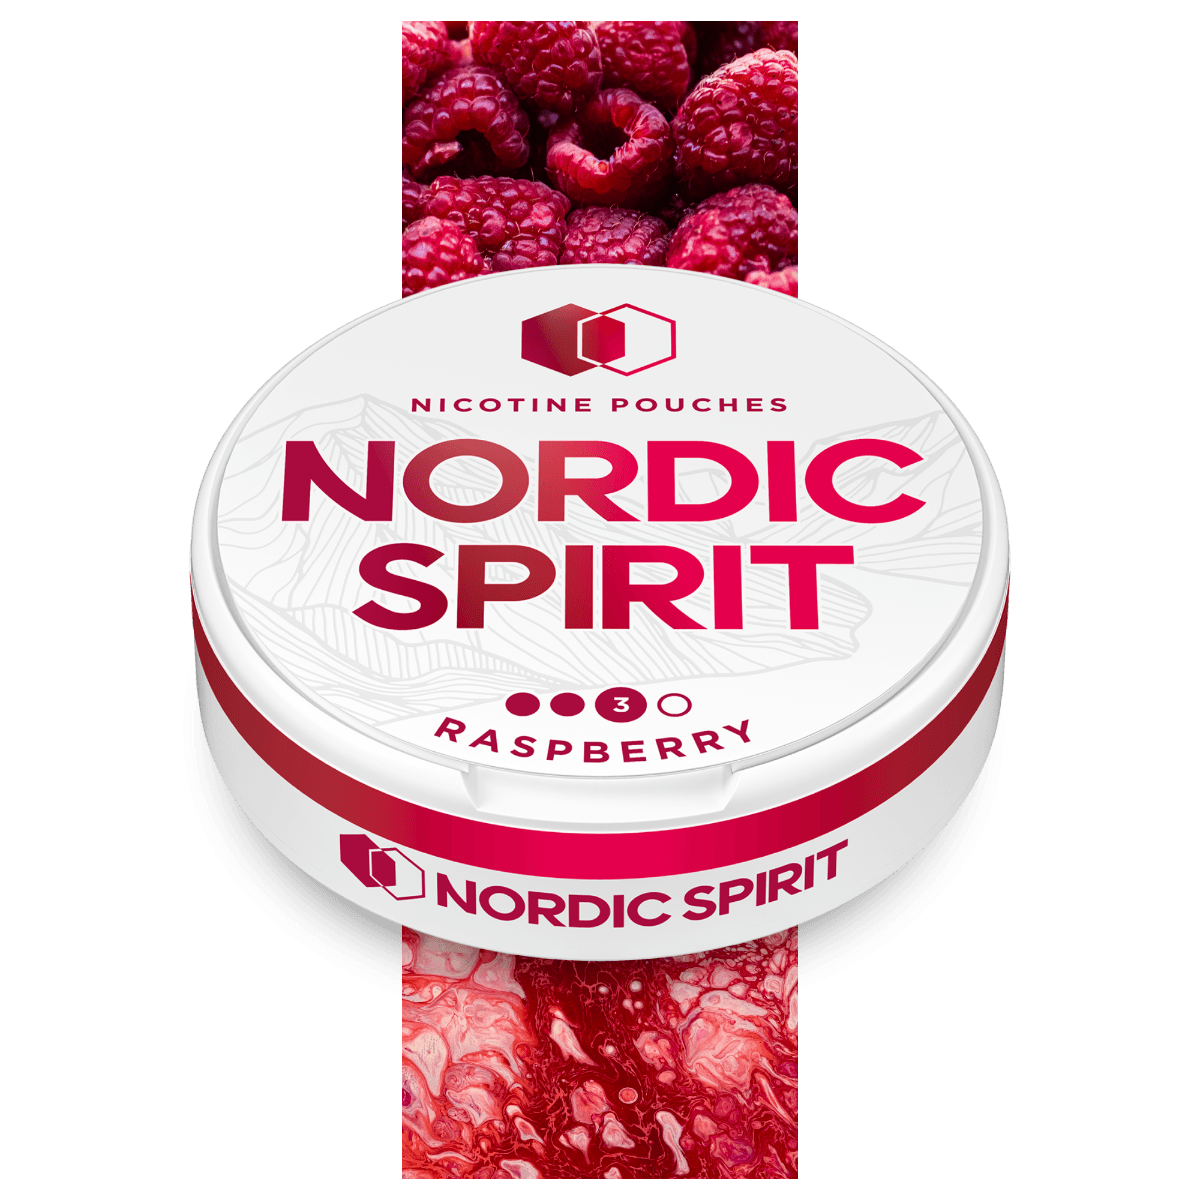 Can of Nordic Spirit Raspberry Nicotine pouches in a strong strength.